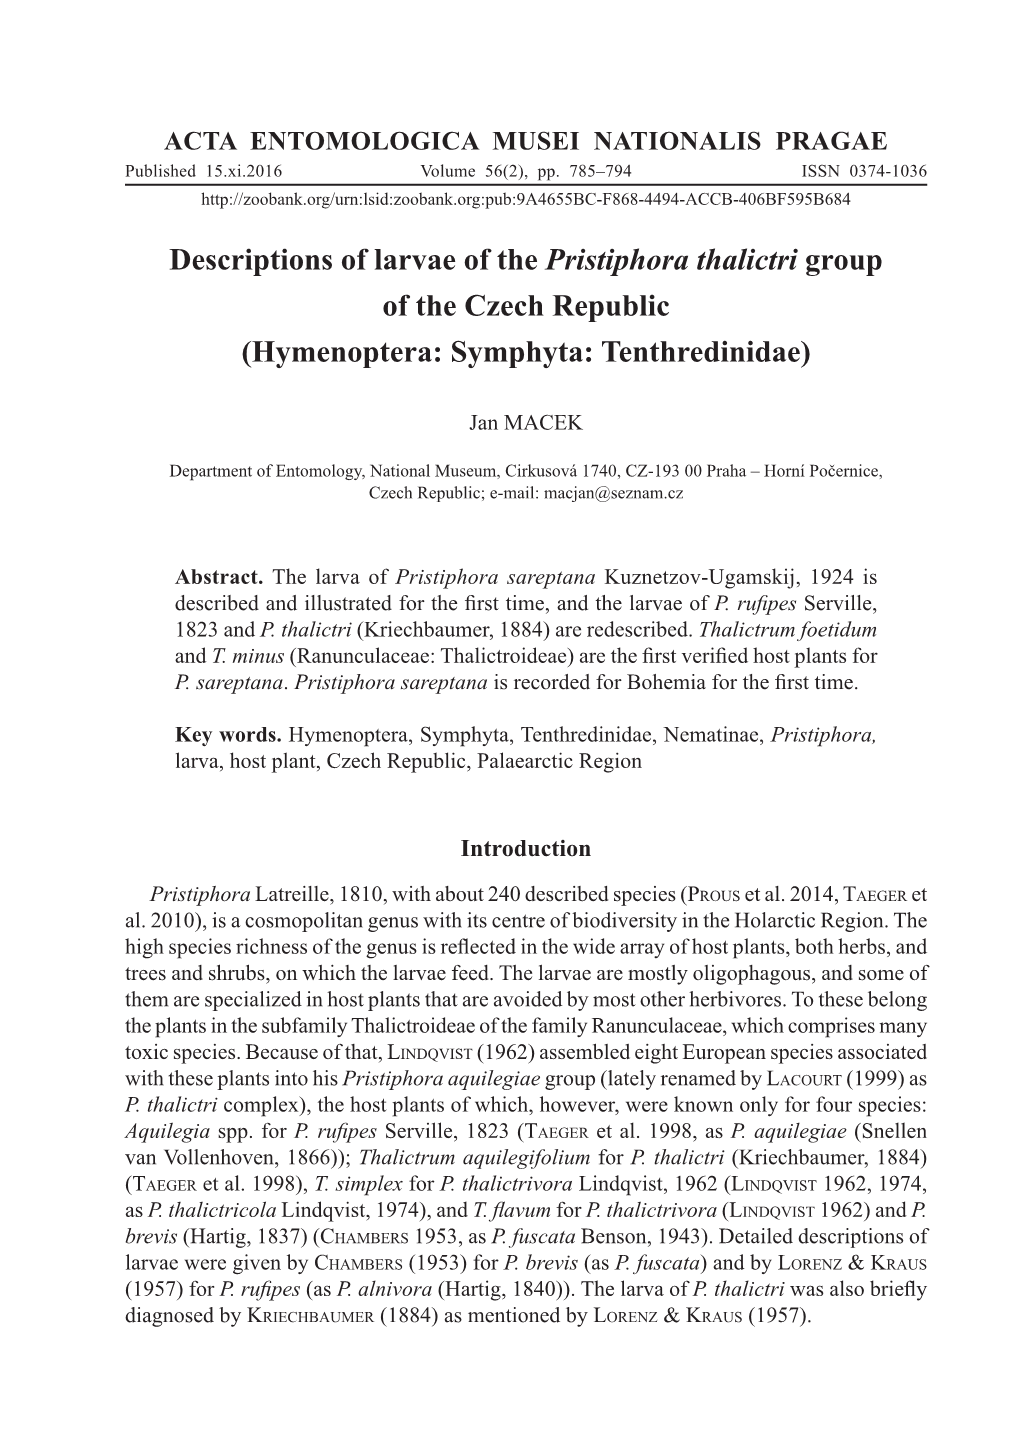 Descriptions of Larvae of the Pristiphora Thalictri Group of the Czech Republic (Hymenoptera: Symphyta: Tenthredinidae)